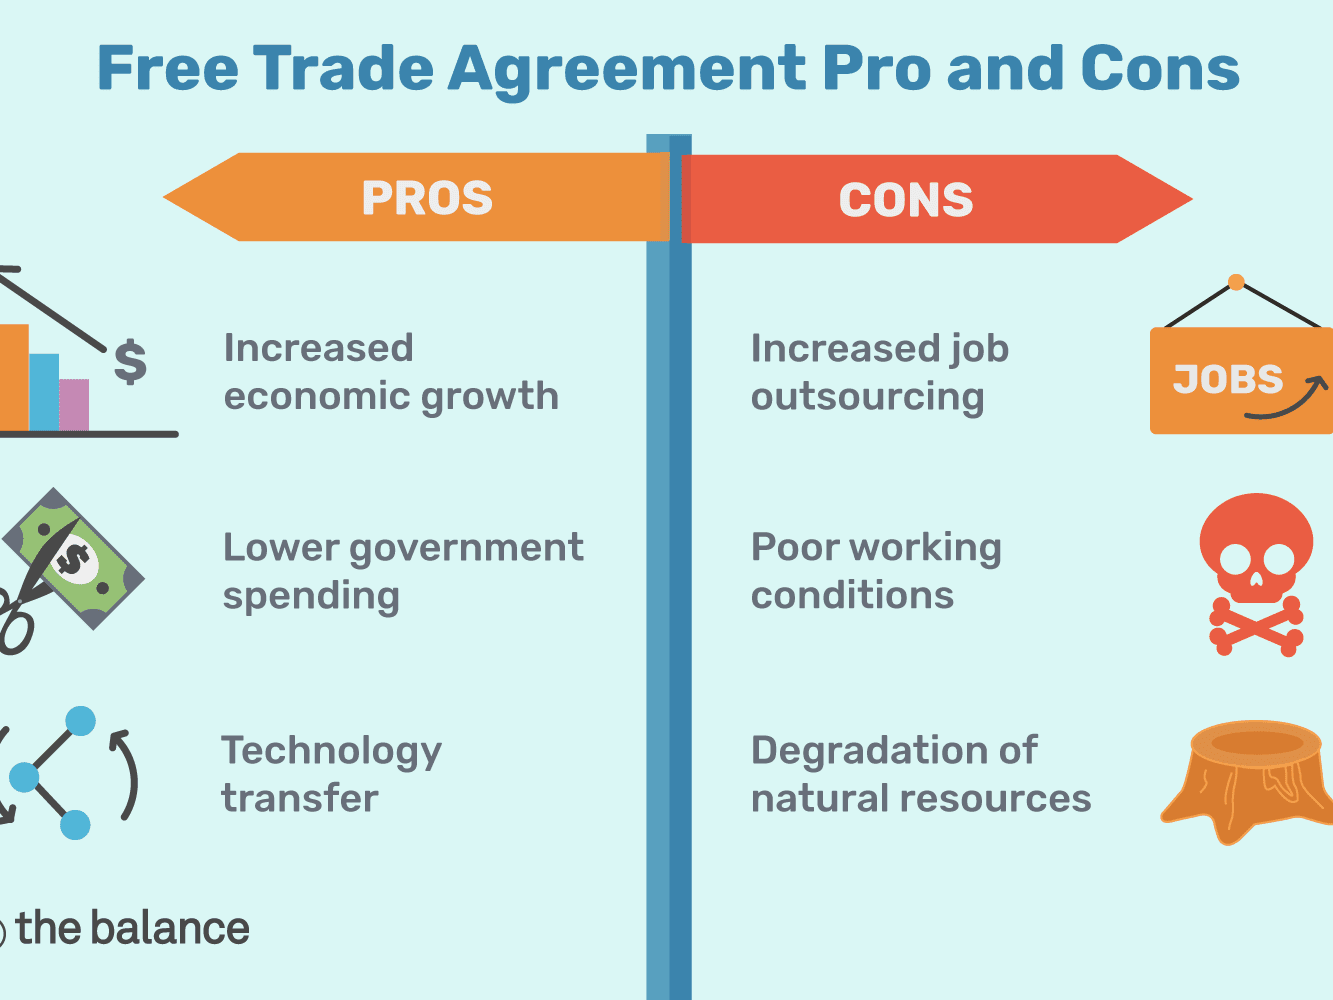 Free Trade Agreements - Overview, Advantages and Disadvantages